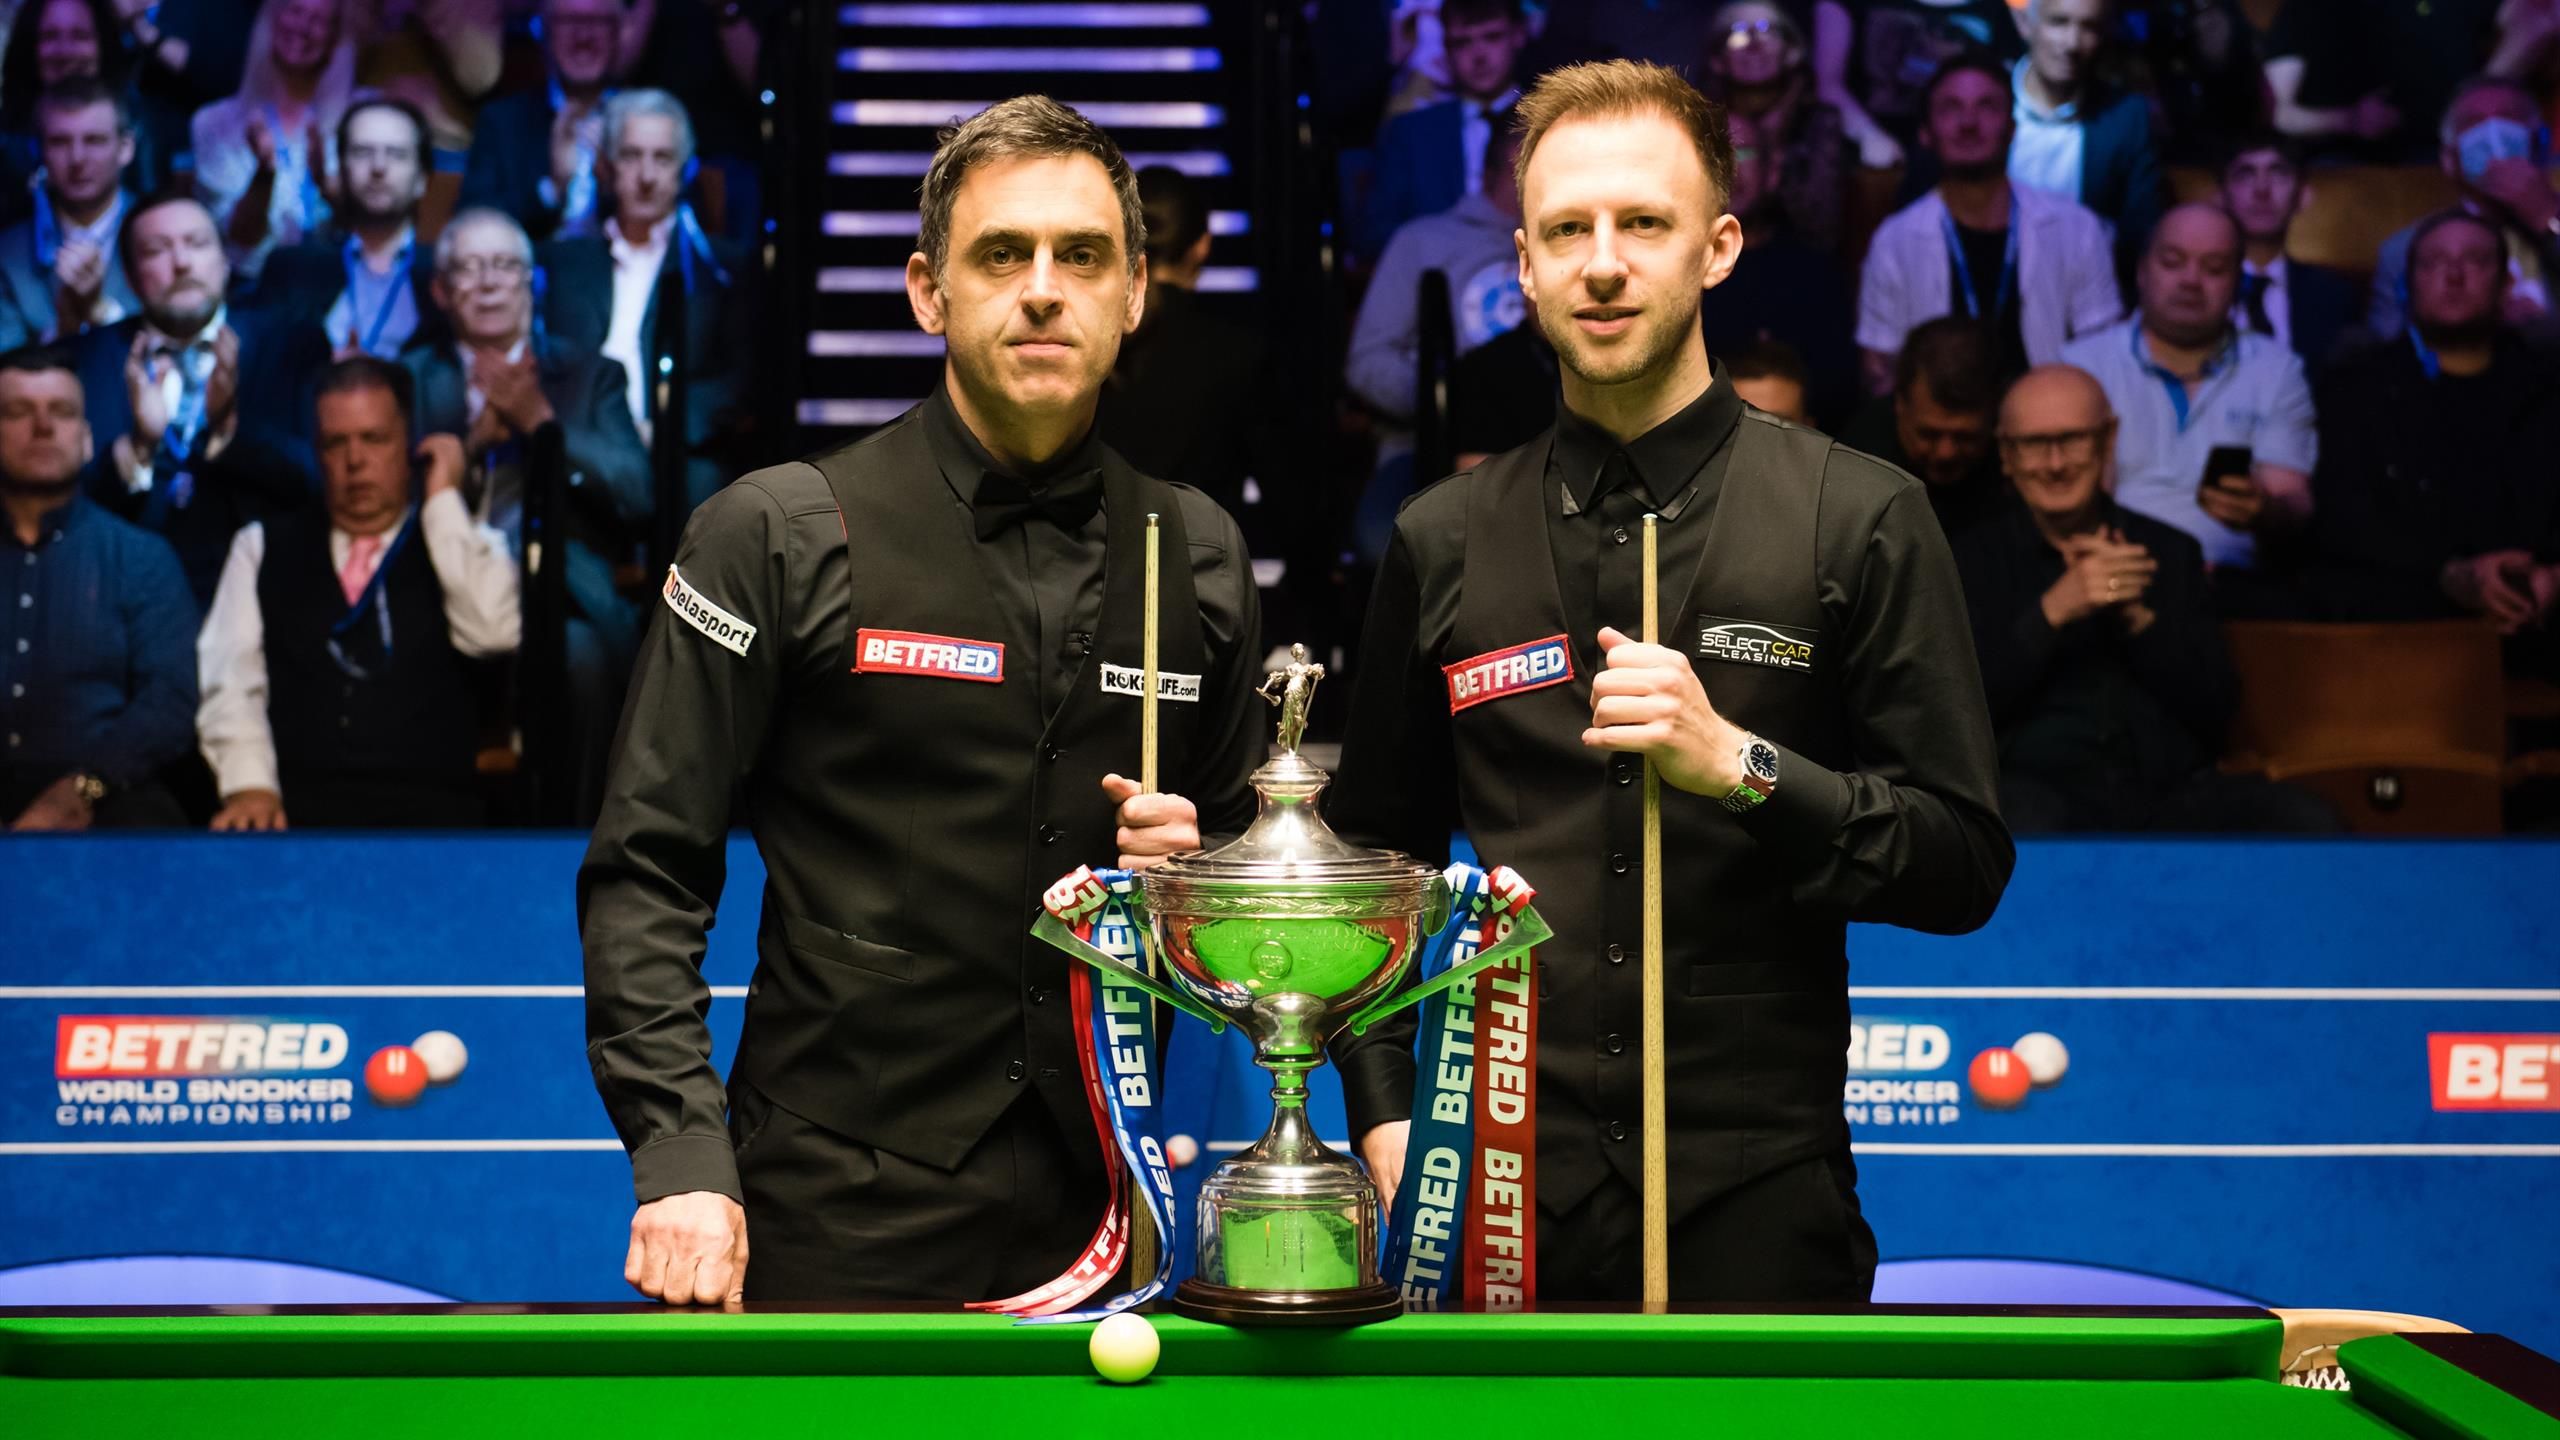 World Snooker Championship final LIVE scores - Ronnie OSullivan takes on Judd Trump for Crucible glory